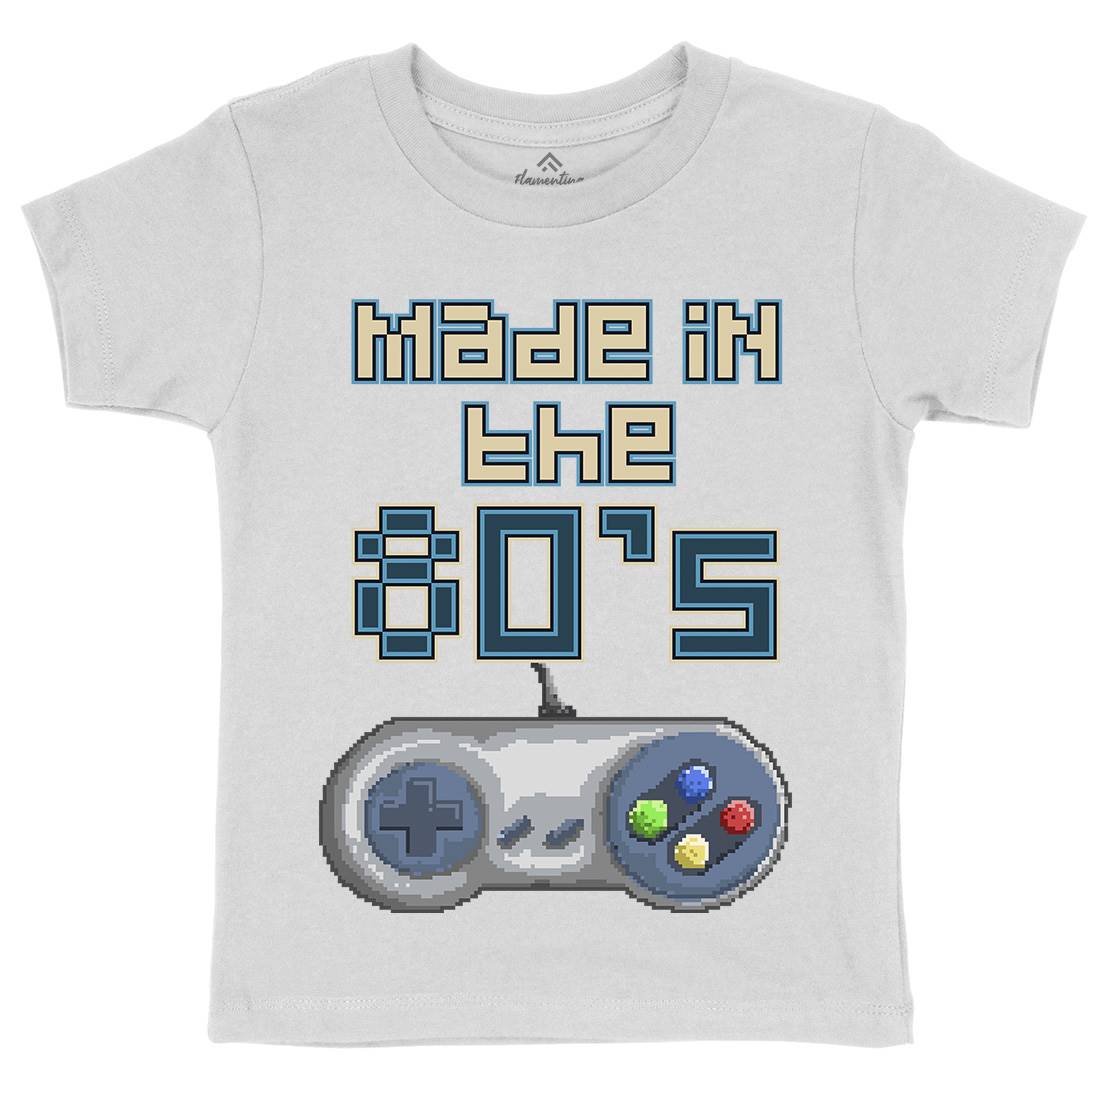 Made In Thes Kids Crew Neck T-Shirt Geek B929